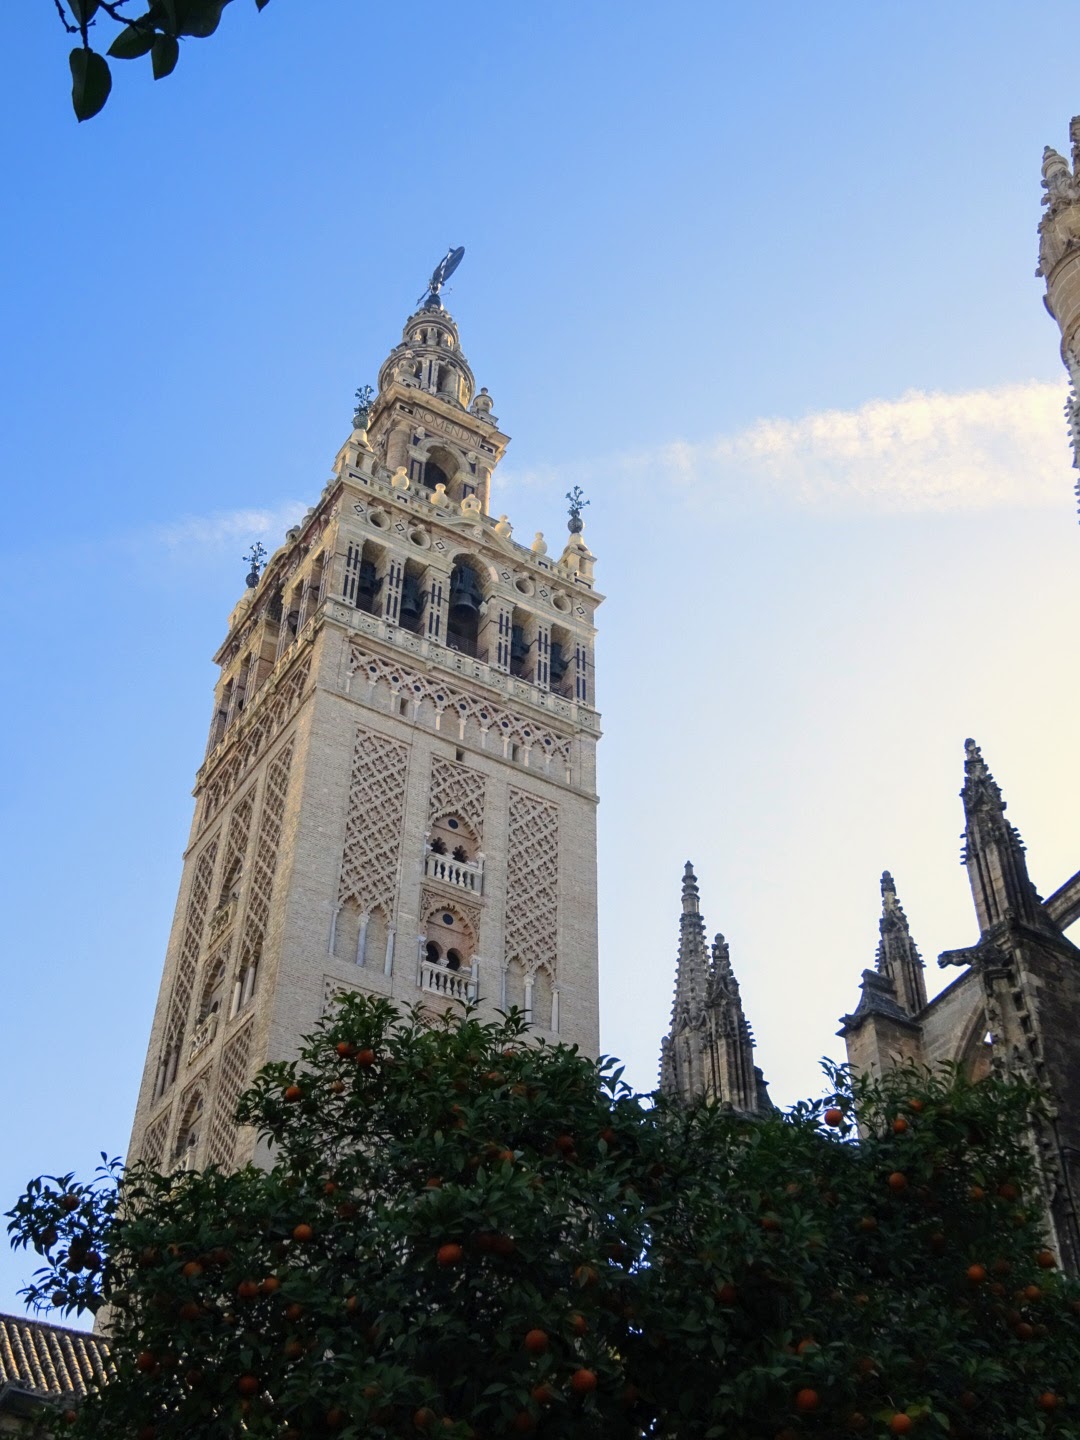 La Giralda. CIEE took us on an excursion where we climbed to the top of La Giralda to see views of Sevilla.